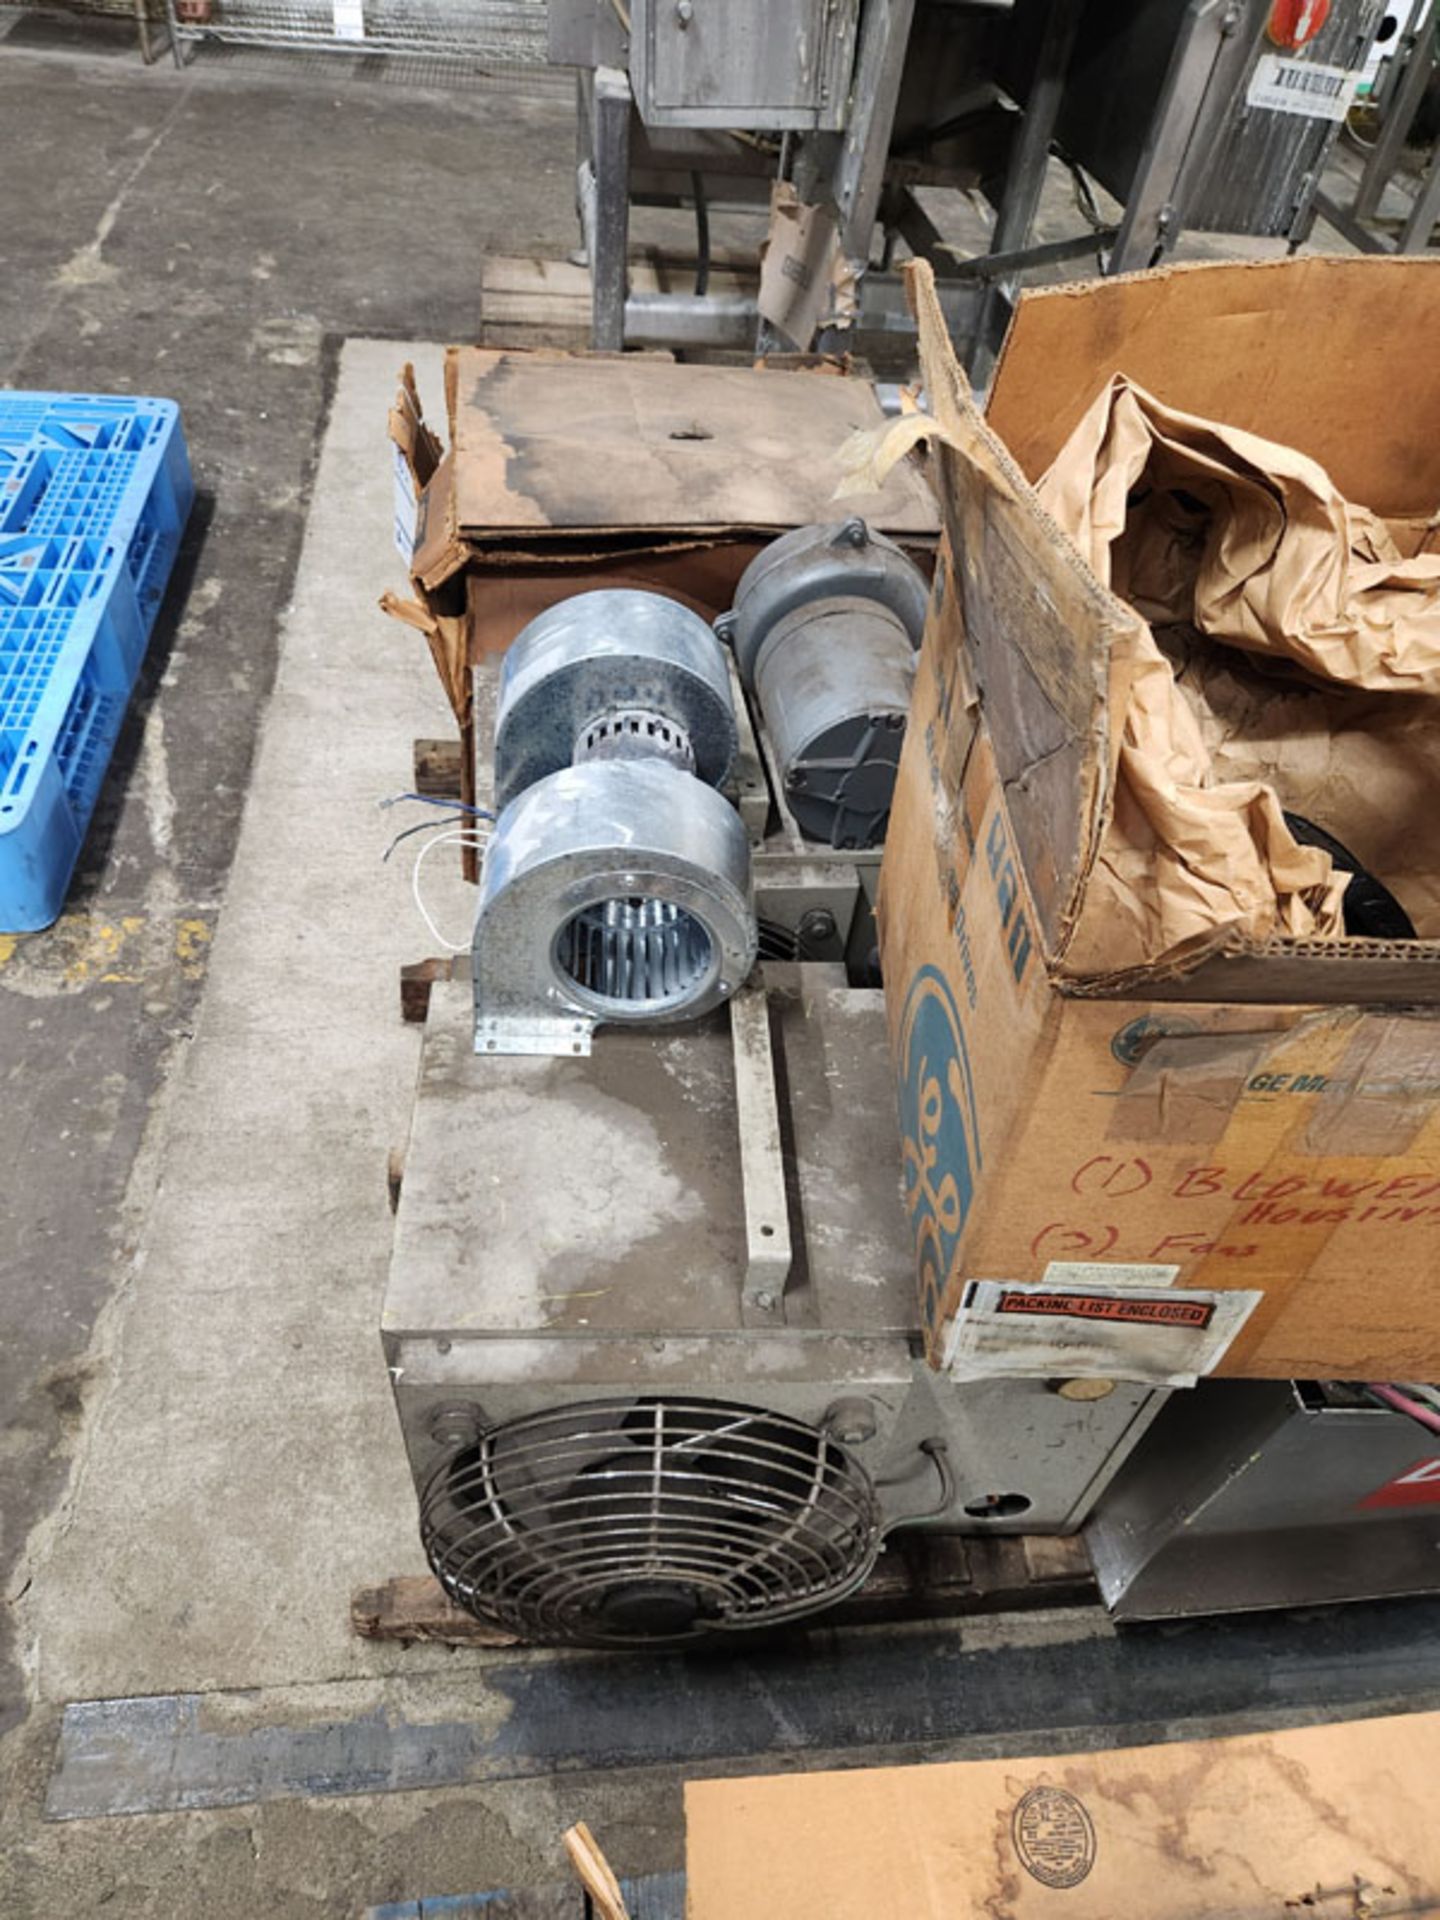 SKID OF HEATERS, BLOWERS, SQUIRREL CAGES, AND DAYTON INFRARED HEATER 5VD63 - Image 2 of 6